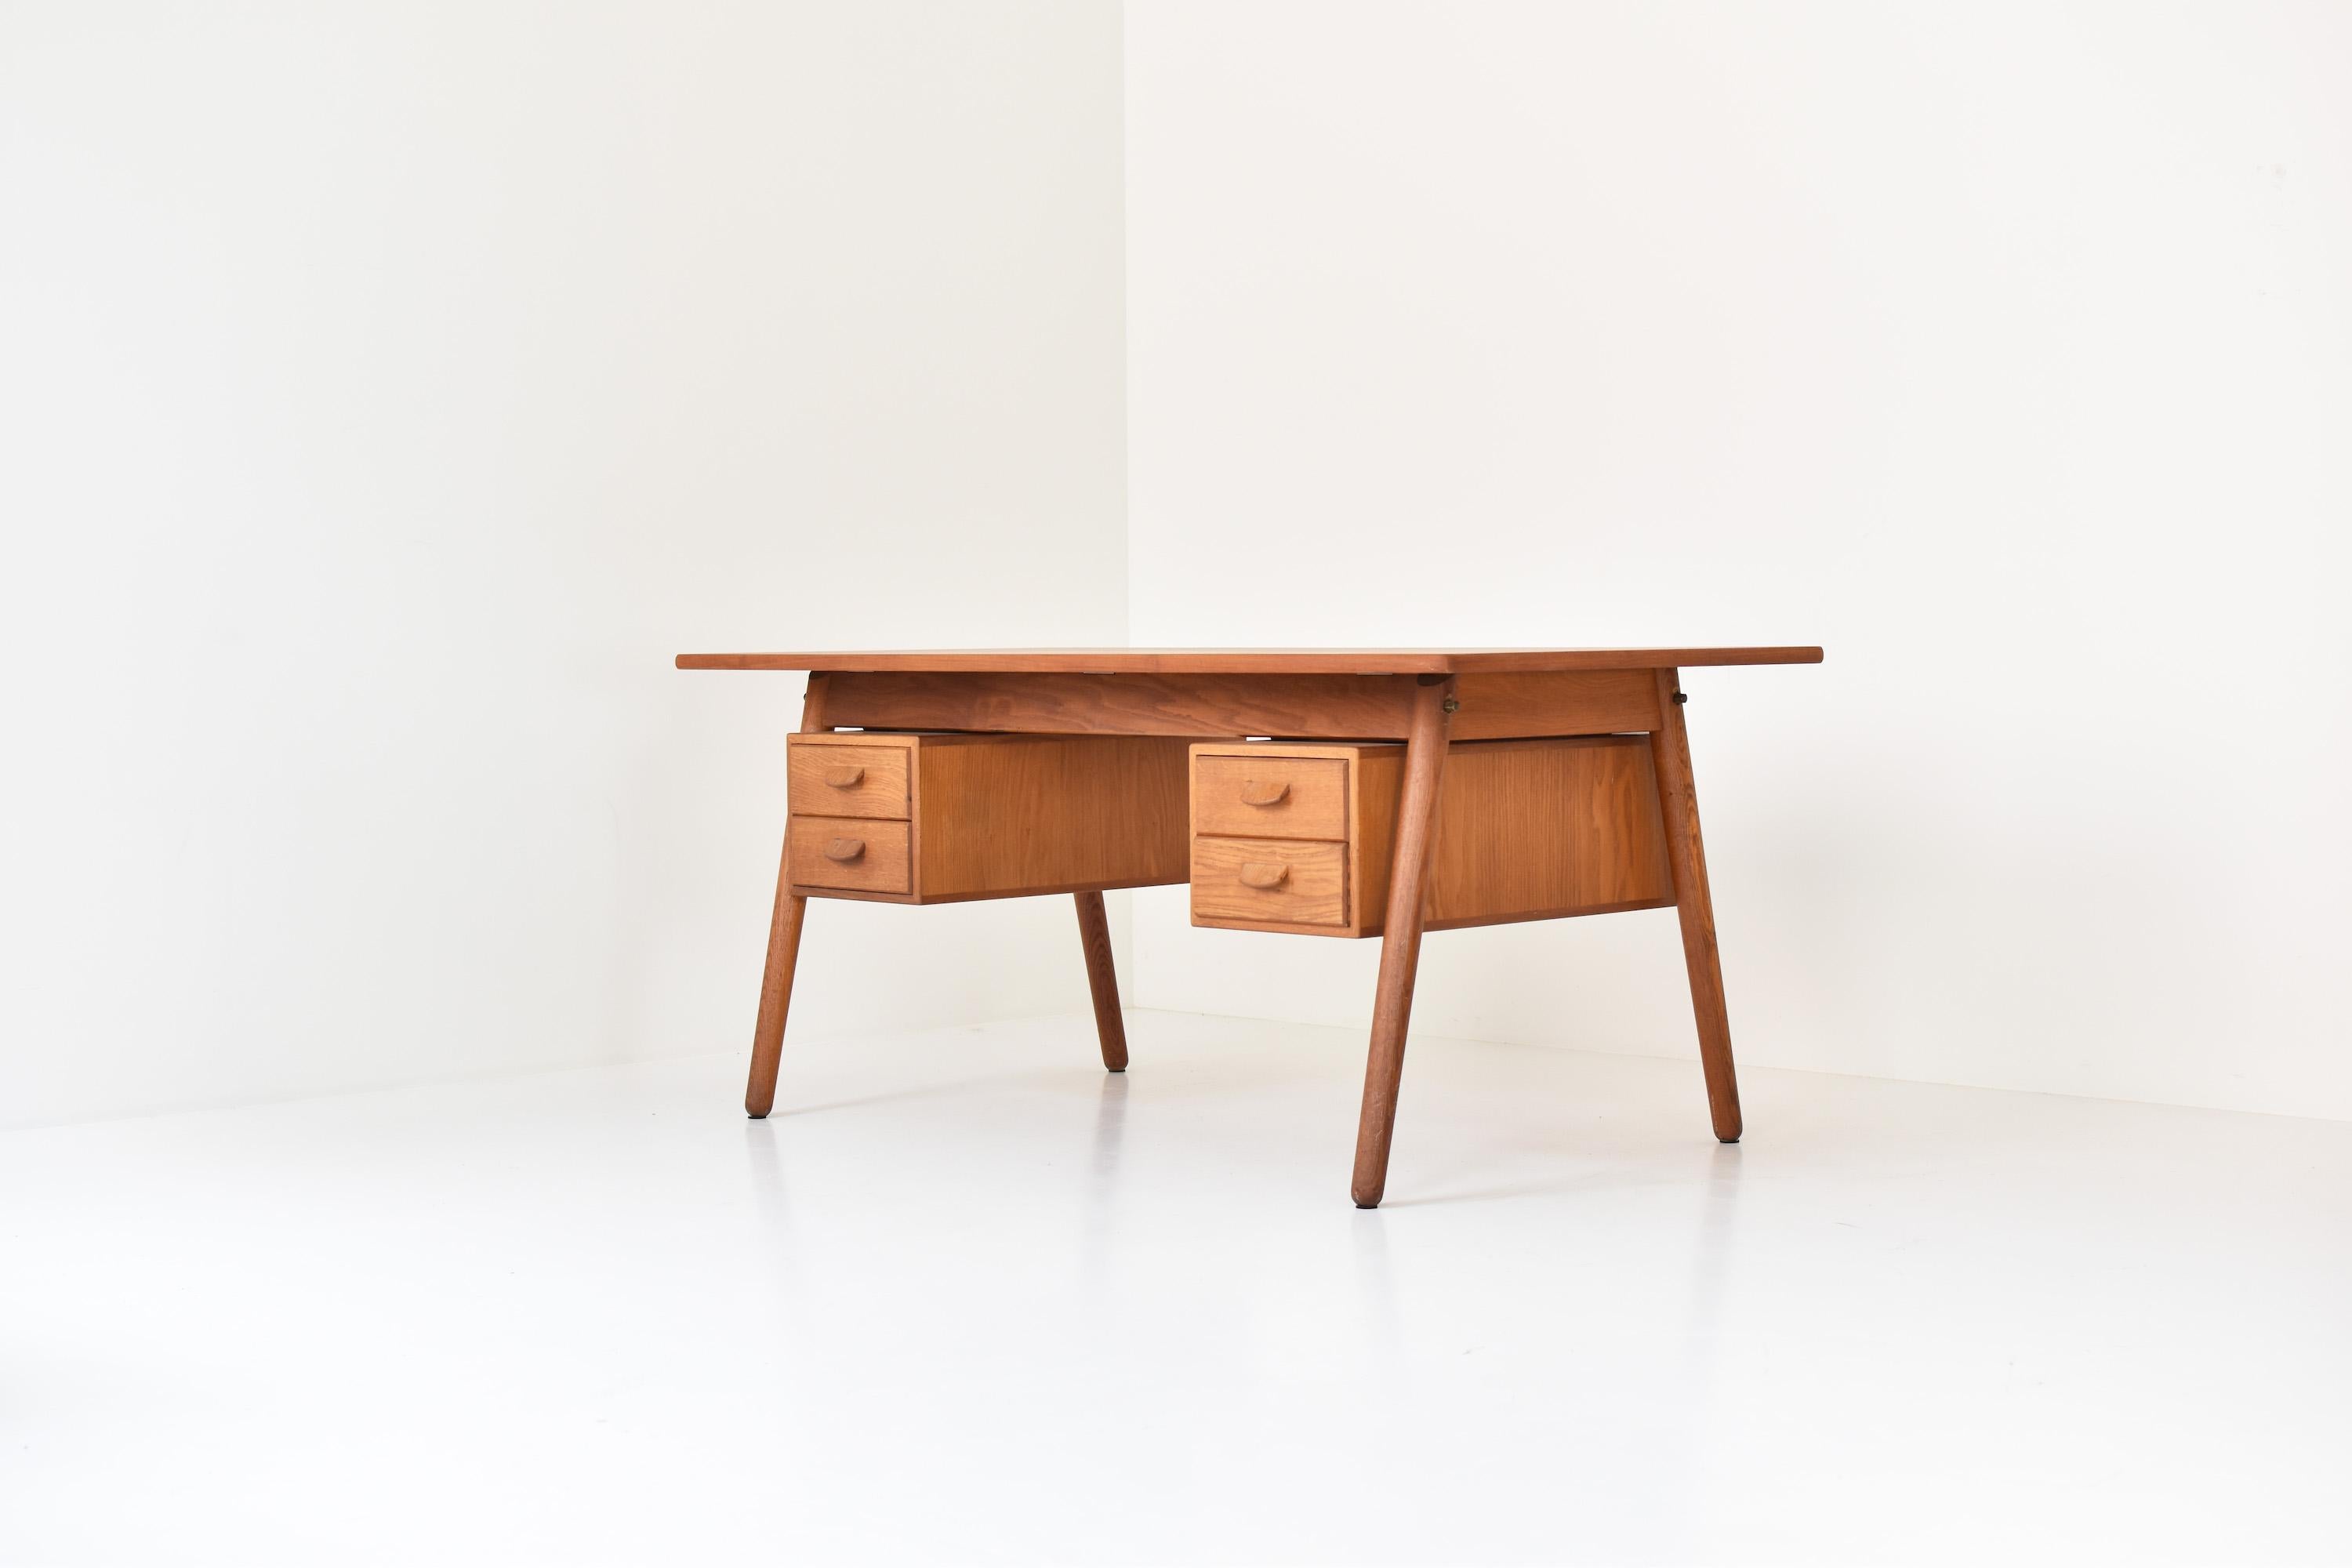 Mid-20th Century Desk or Dining Table Designed by Poul Volther for FDB Mobler, Denmark, 1950’s